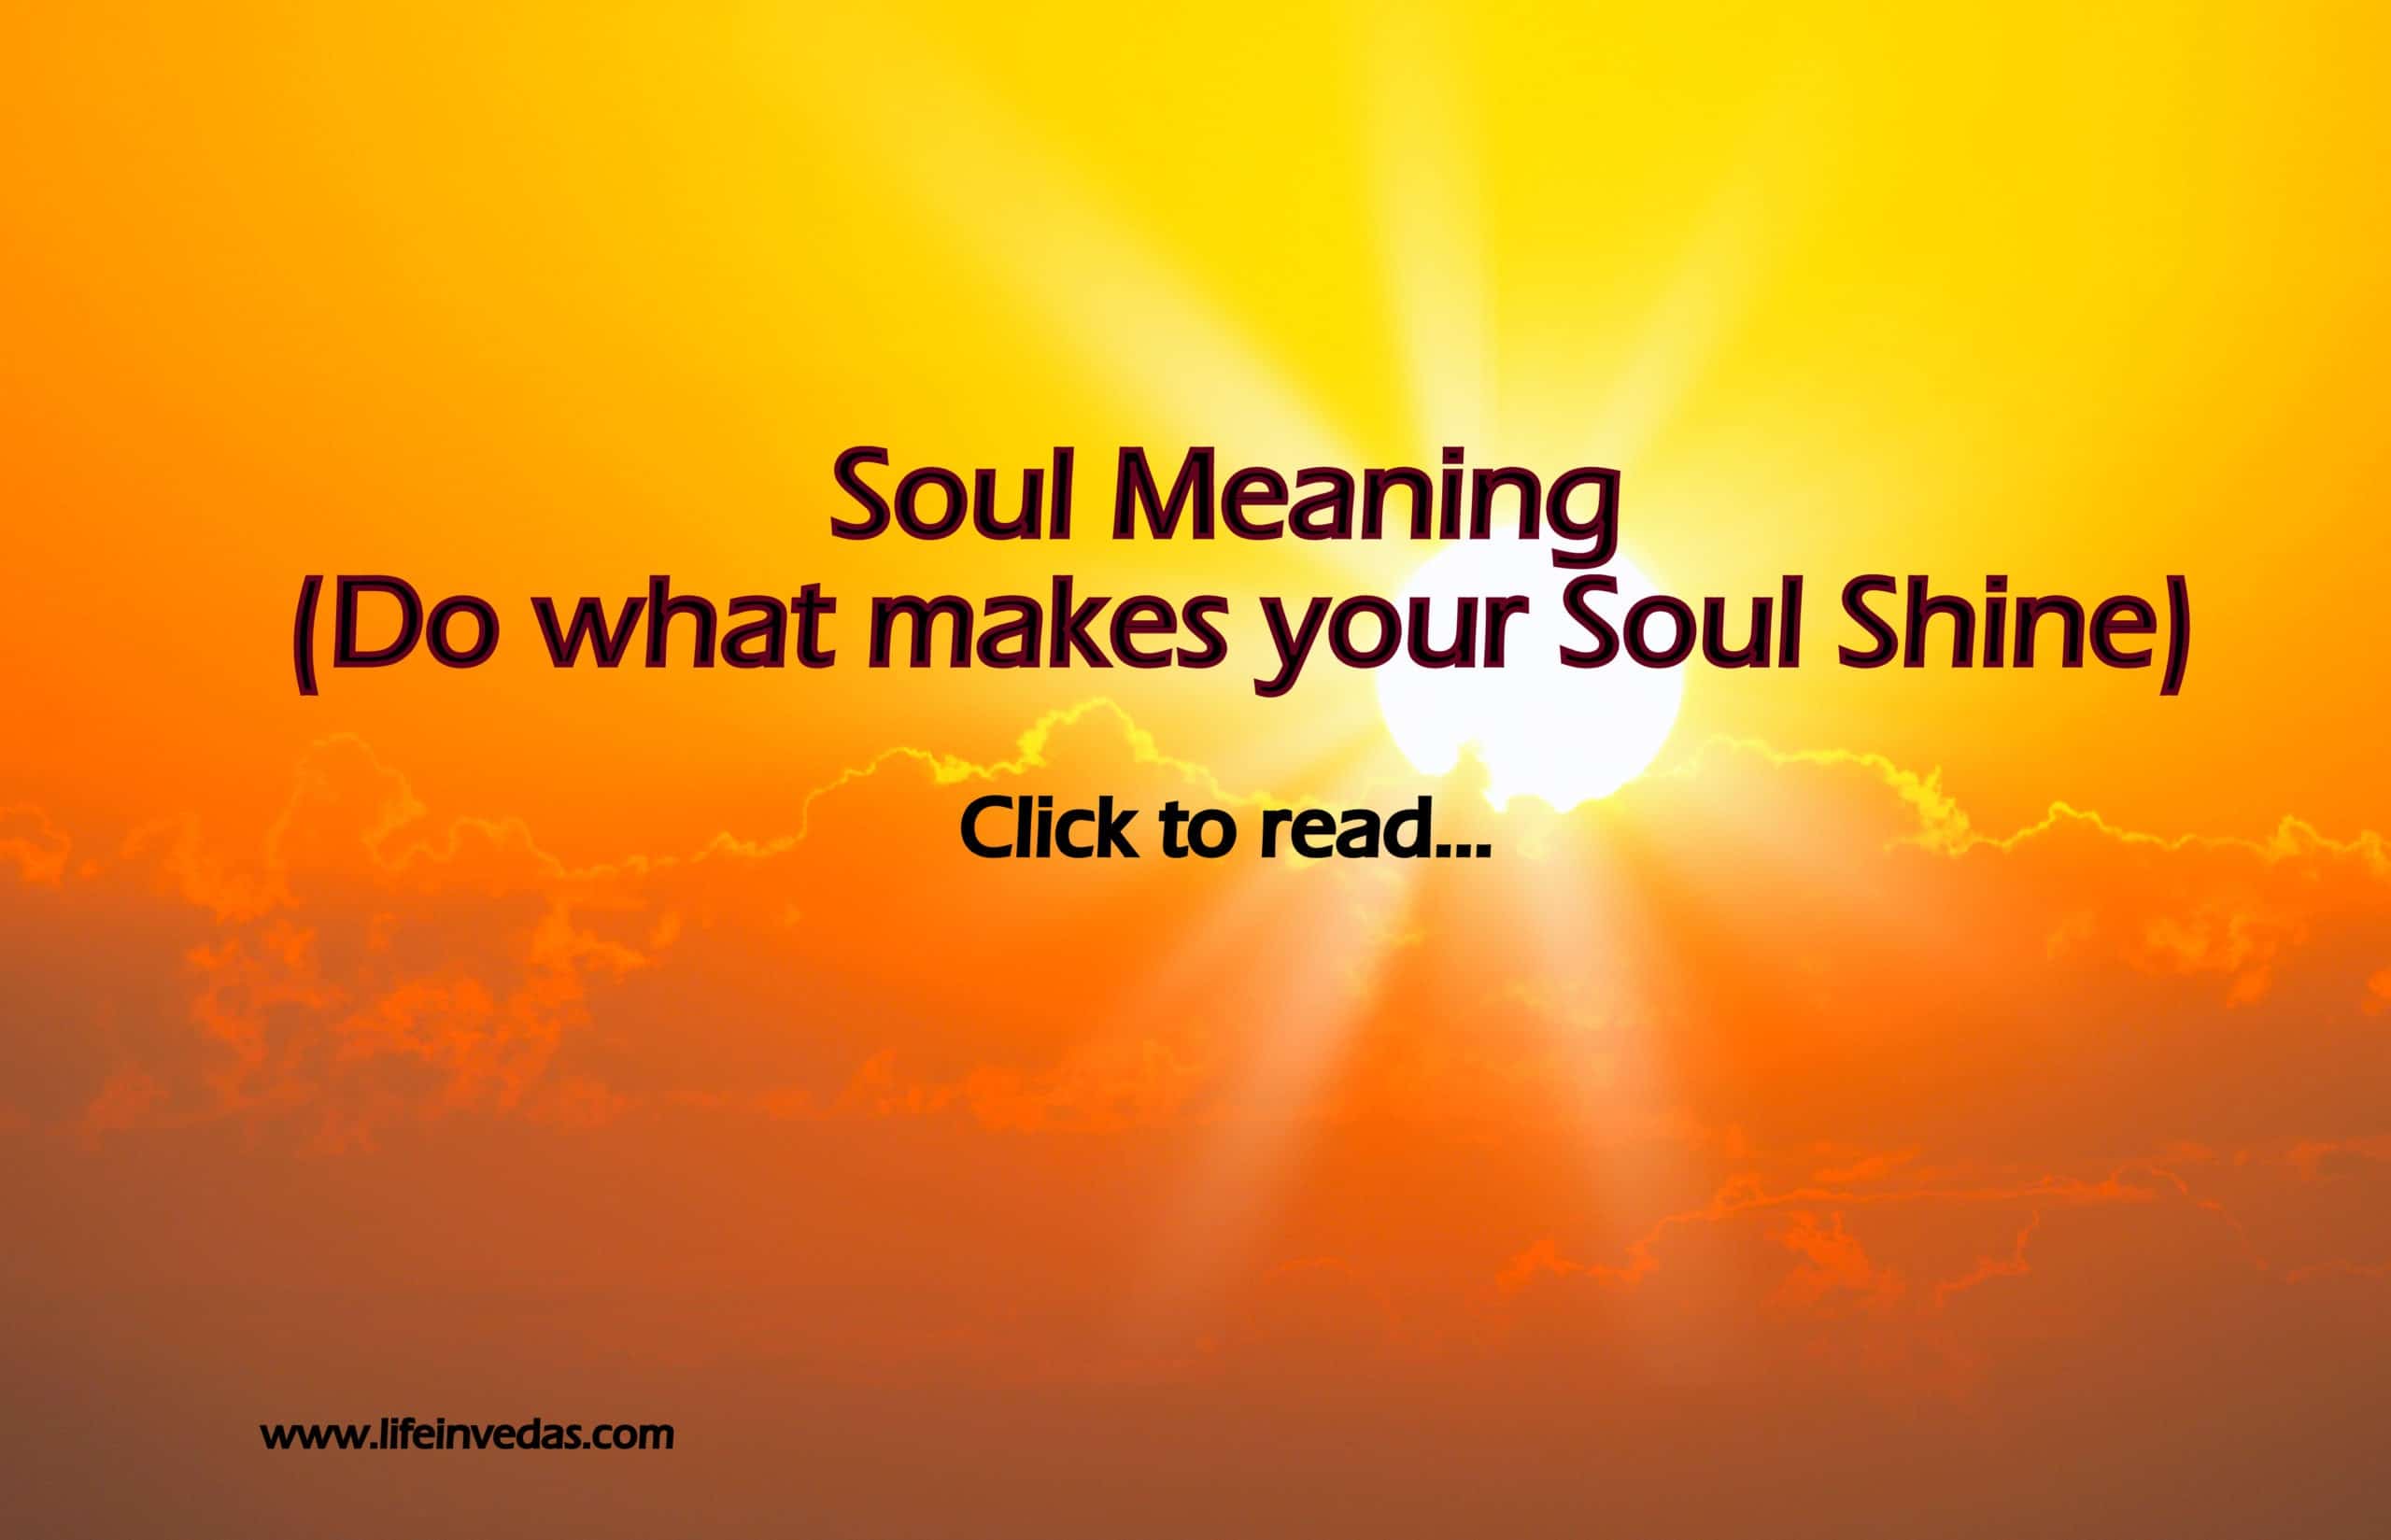 What does it mean to have a soul